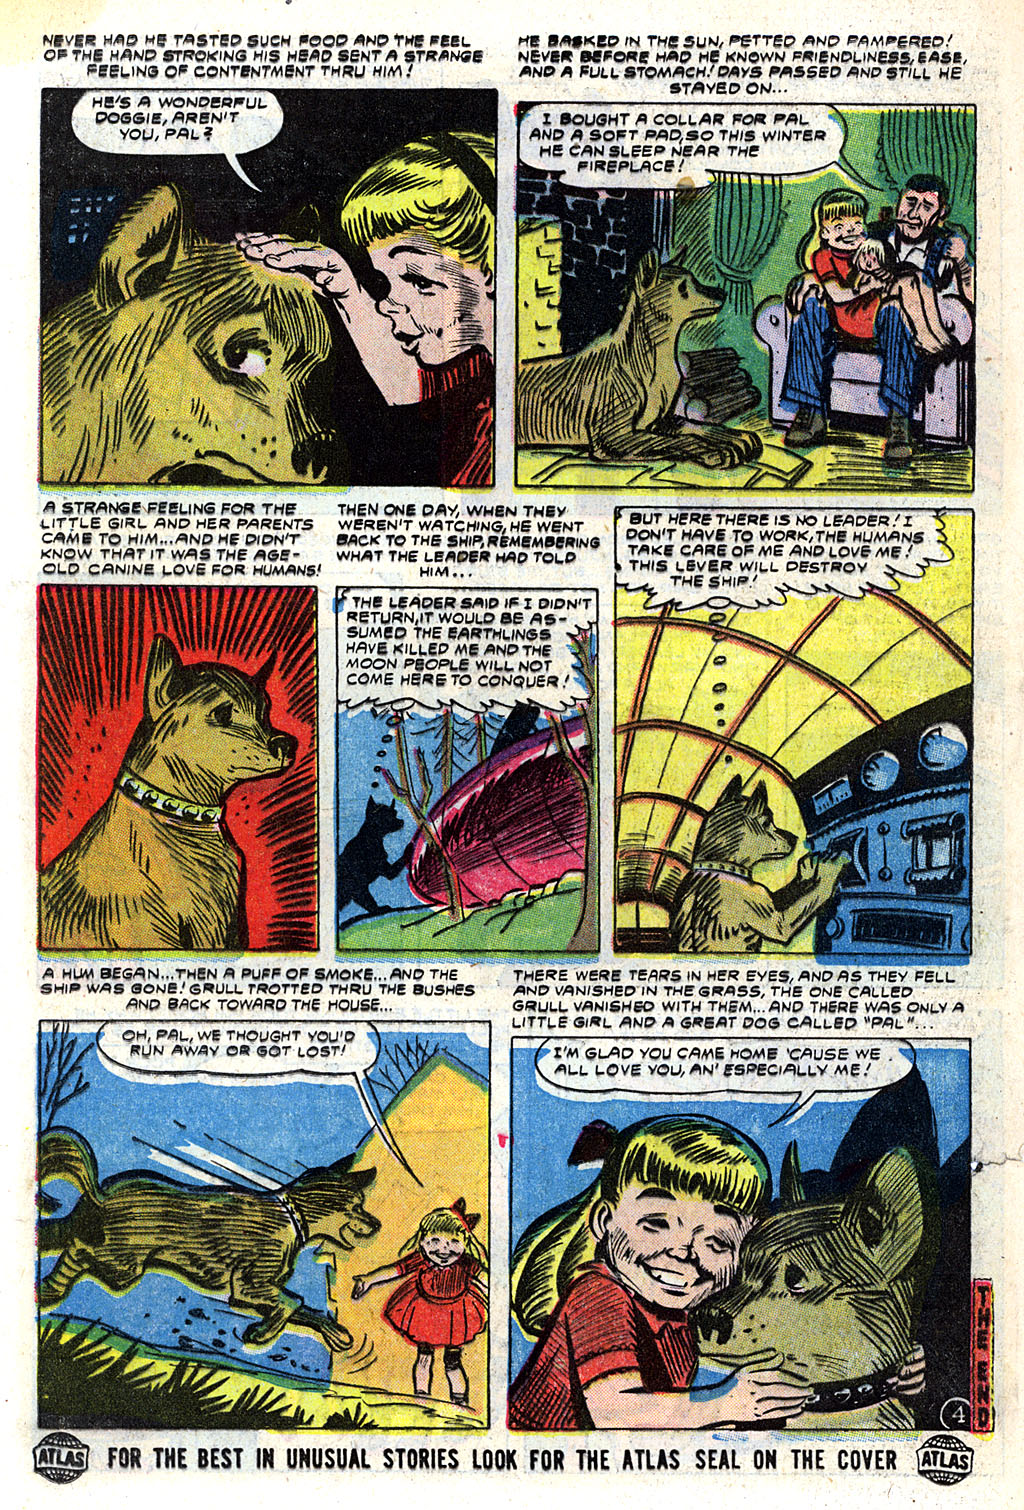 Marvel Tales (1949) 131 Page 23